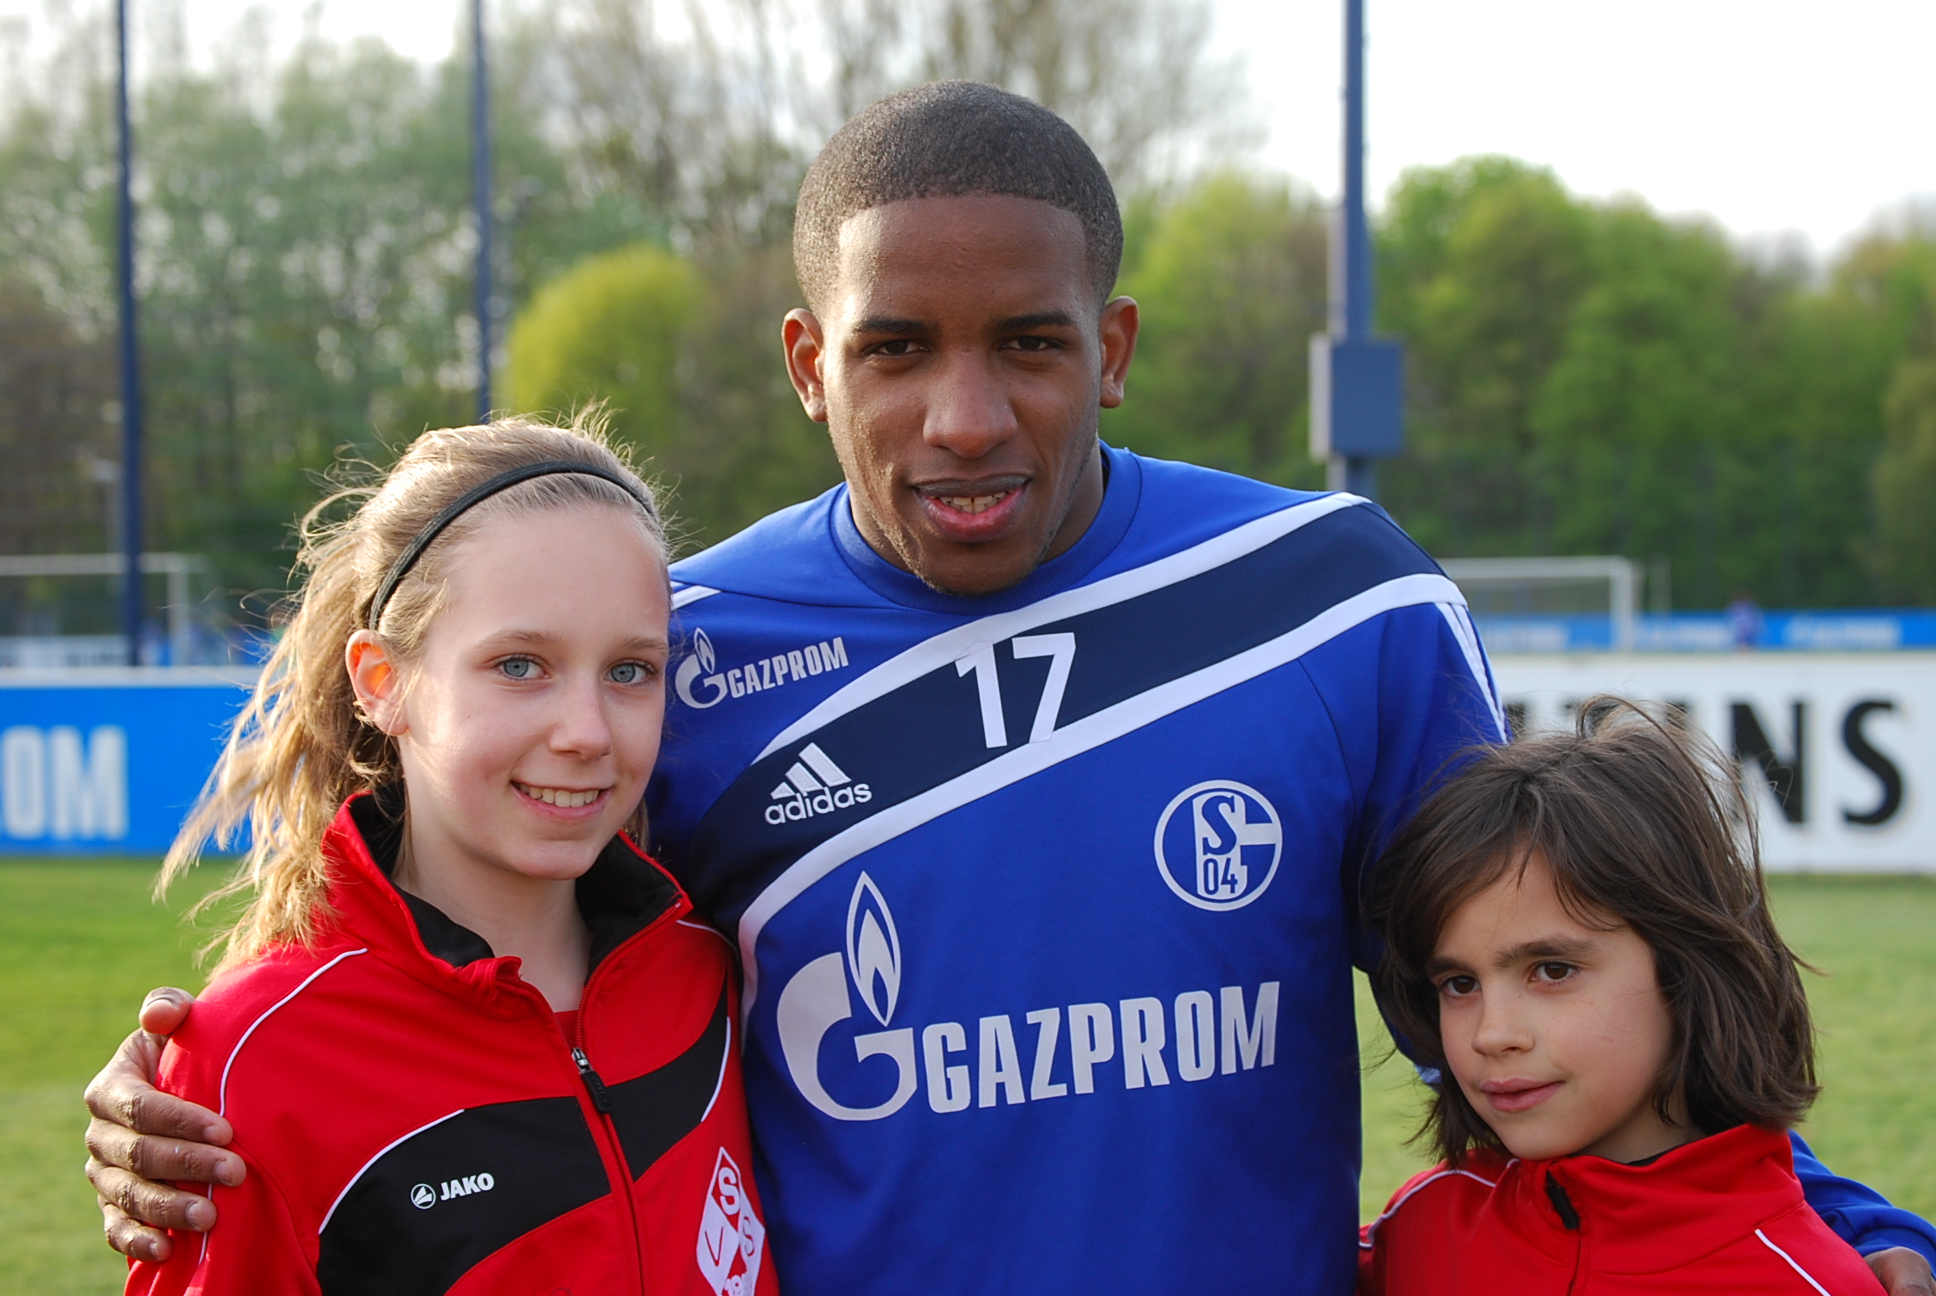 a young man standing next to two girls near a soccer field